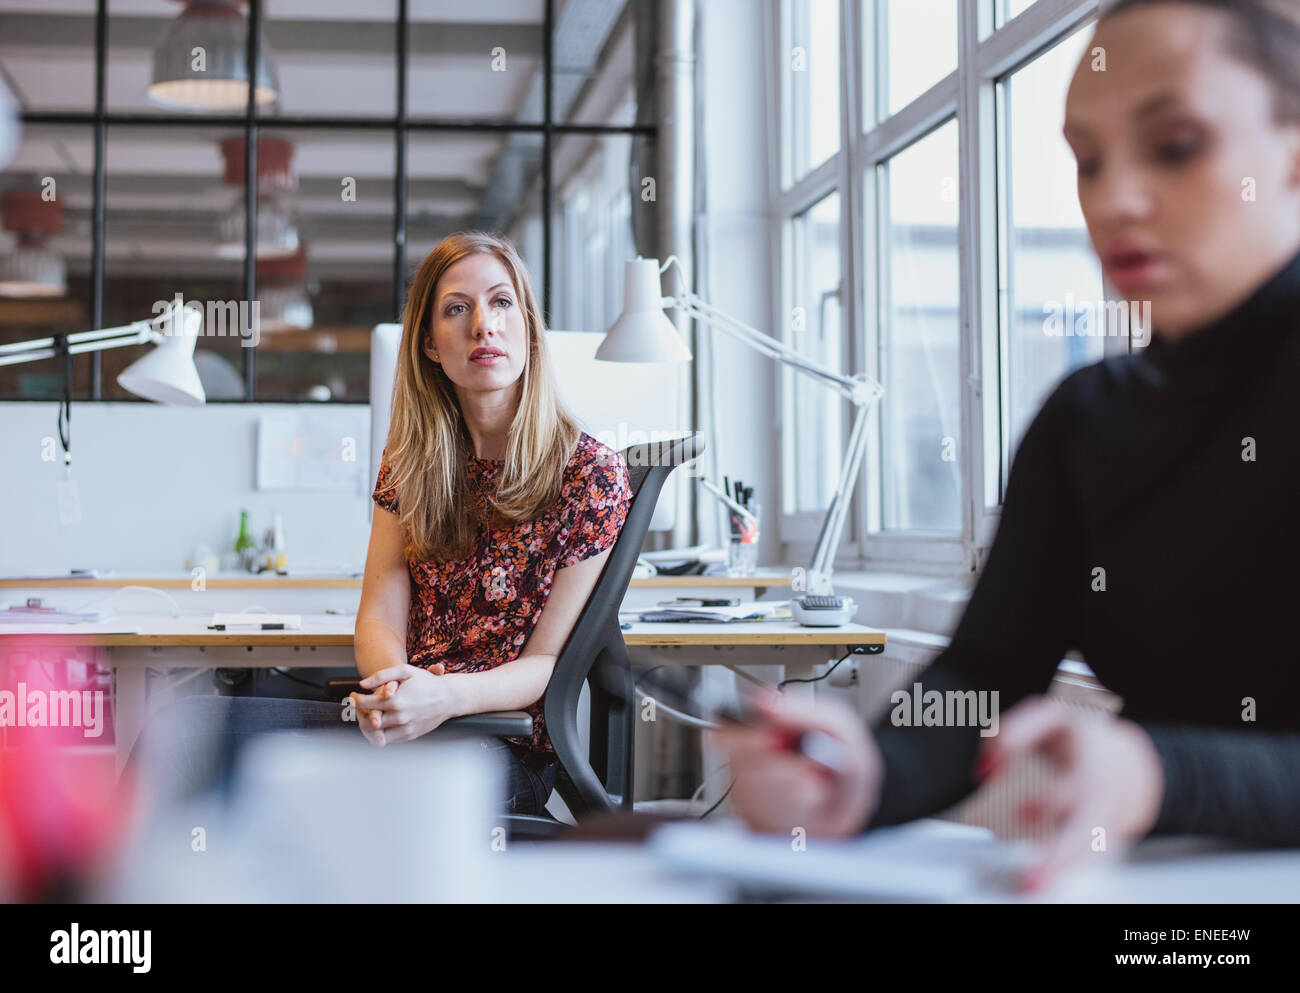 Image of young woman sitting at her desk looking away thinking. Female executive in office lost in thought. Stock Photo